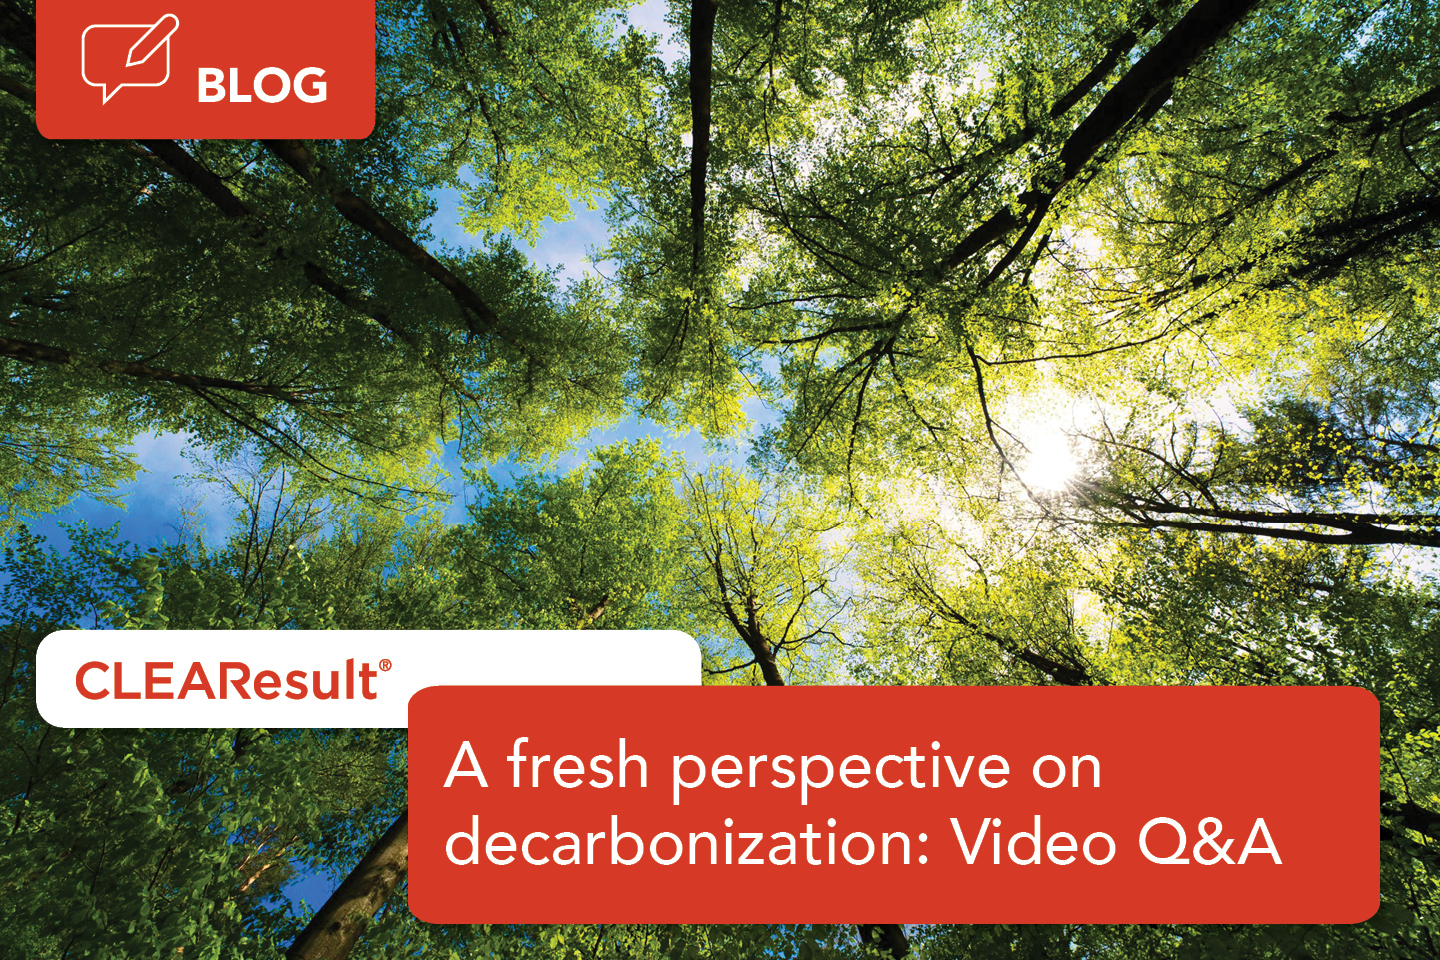 A fresh perspective on decarbonization: Video Q&A